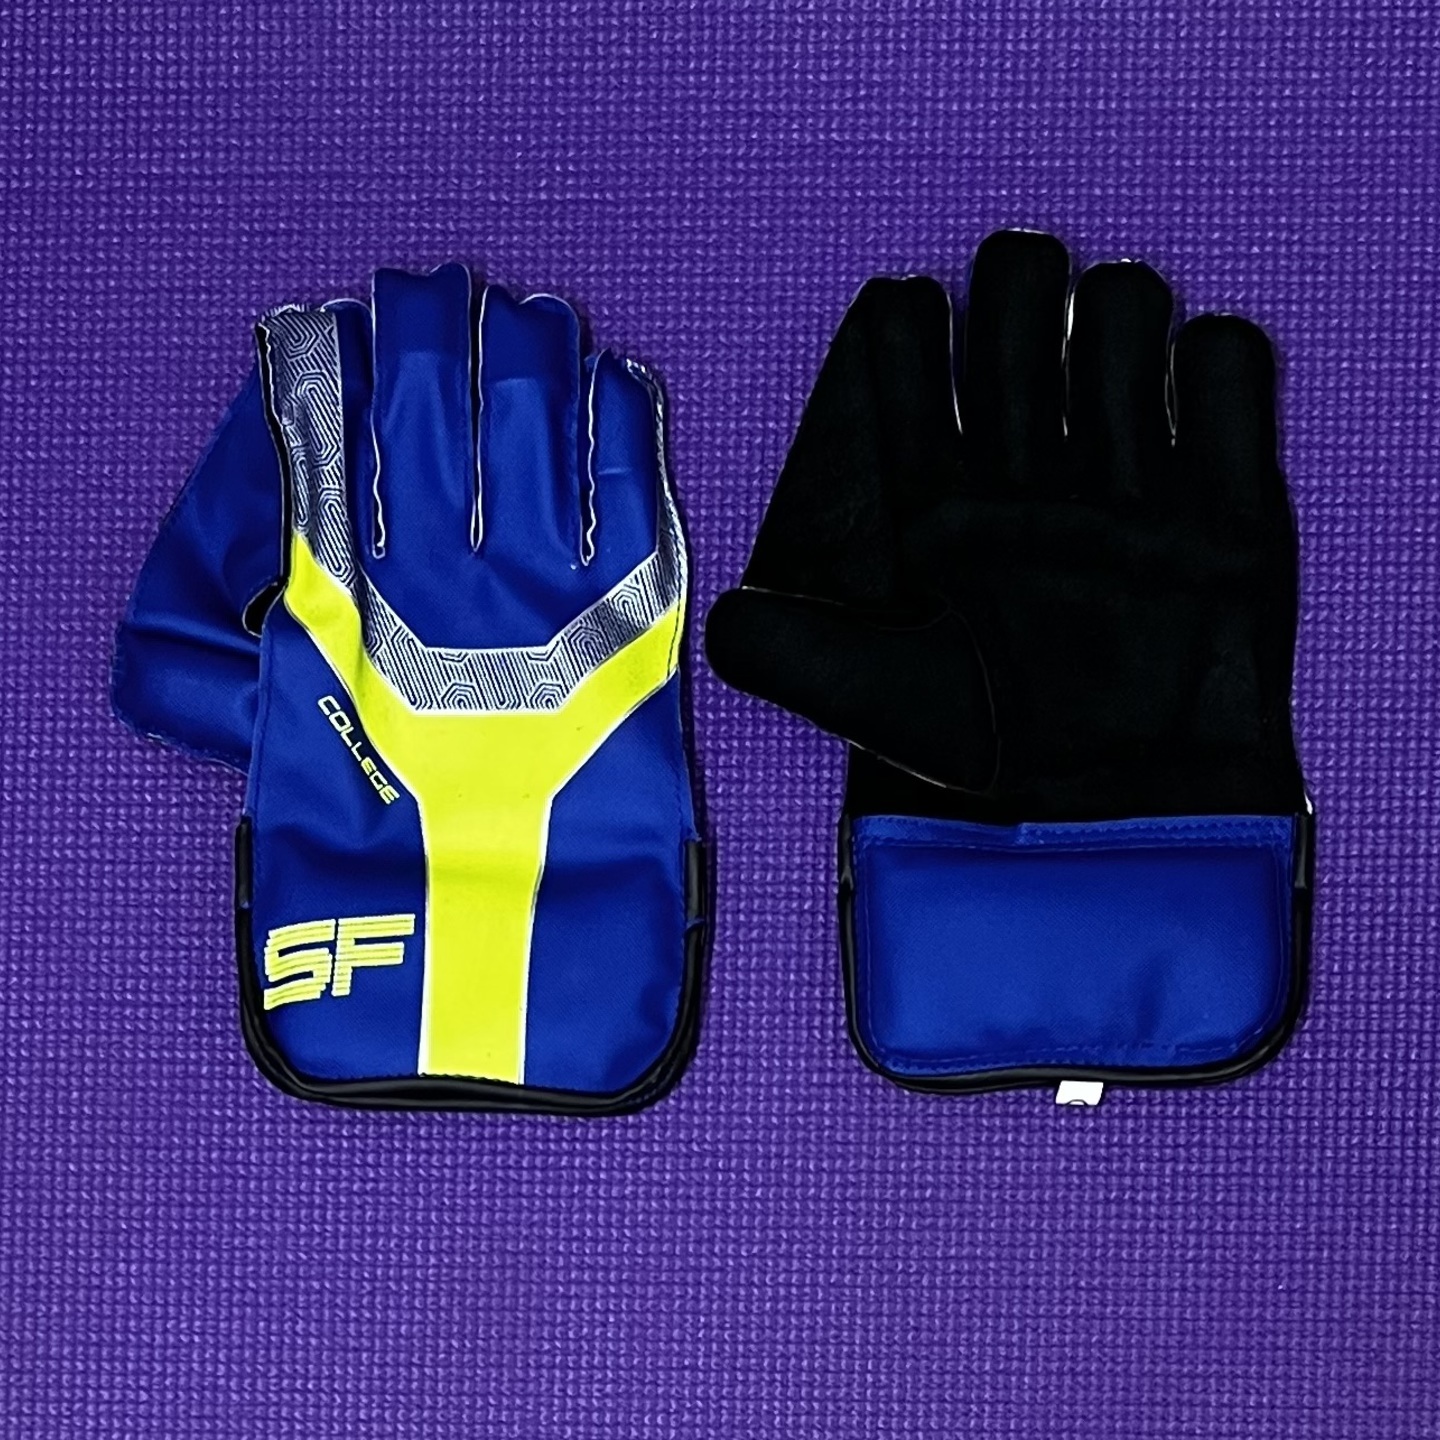 SF COLLEGE CRICKET WICKET KEEPING GLOVES BOYS